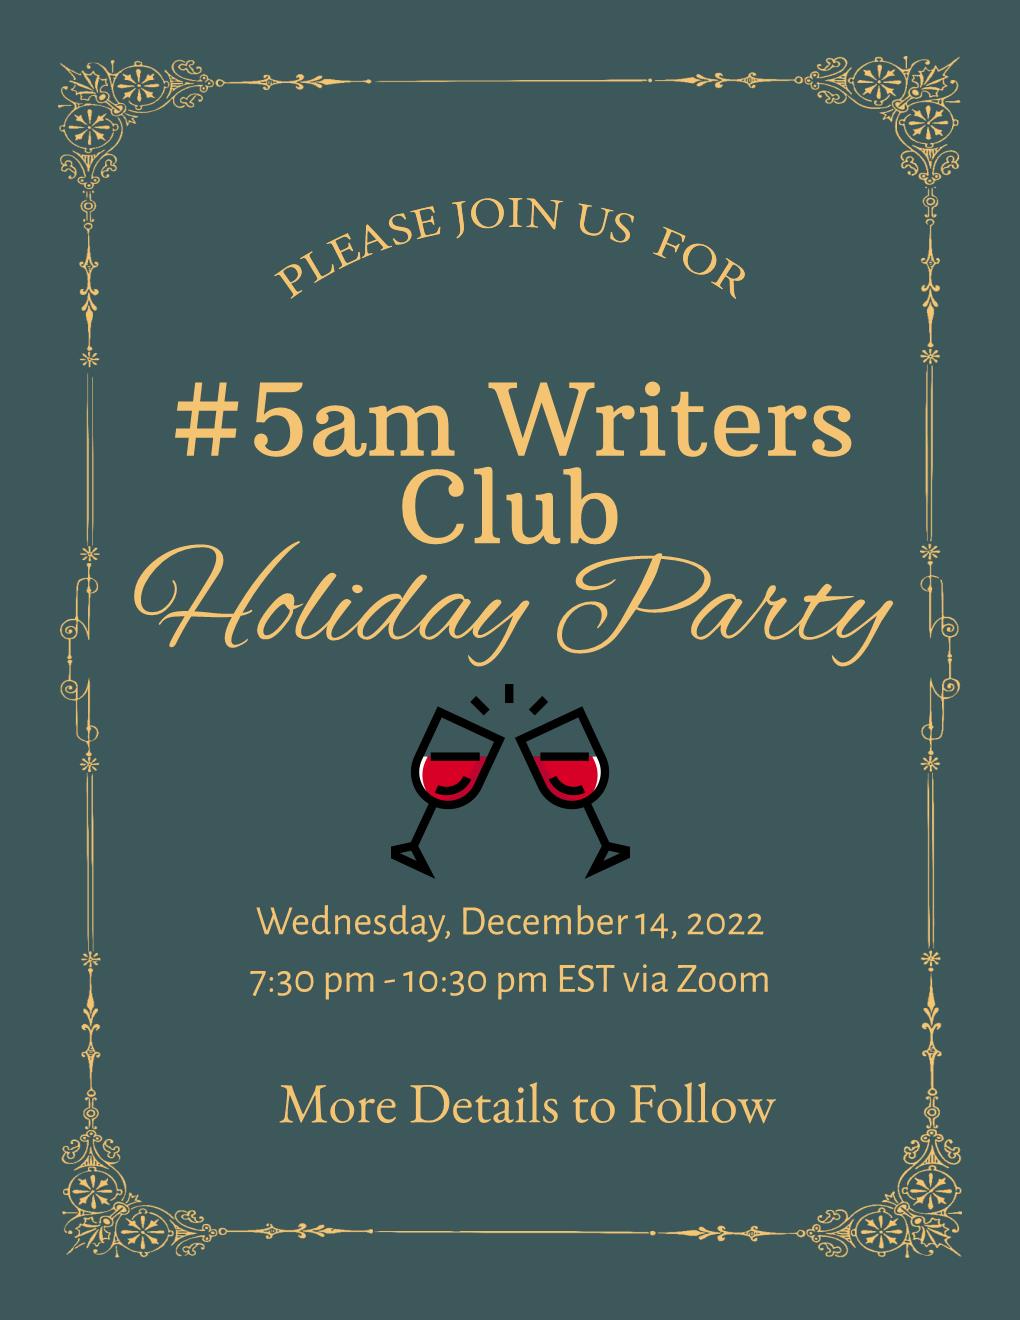 Holiday Party Save the Date 